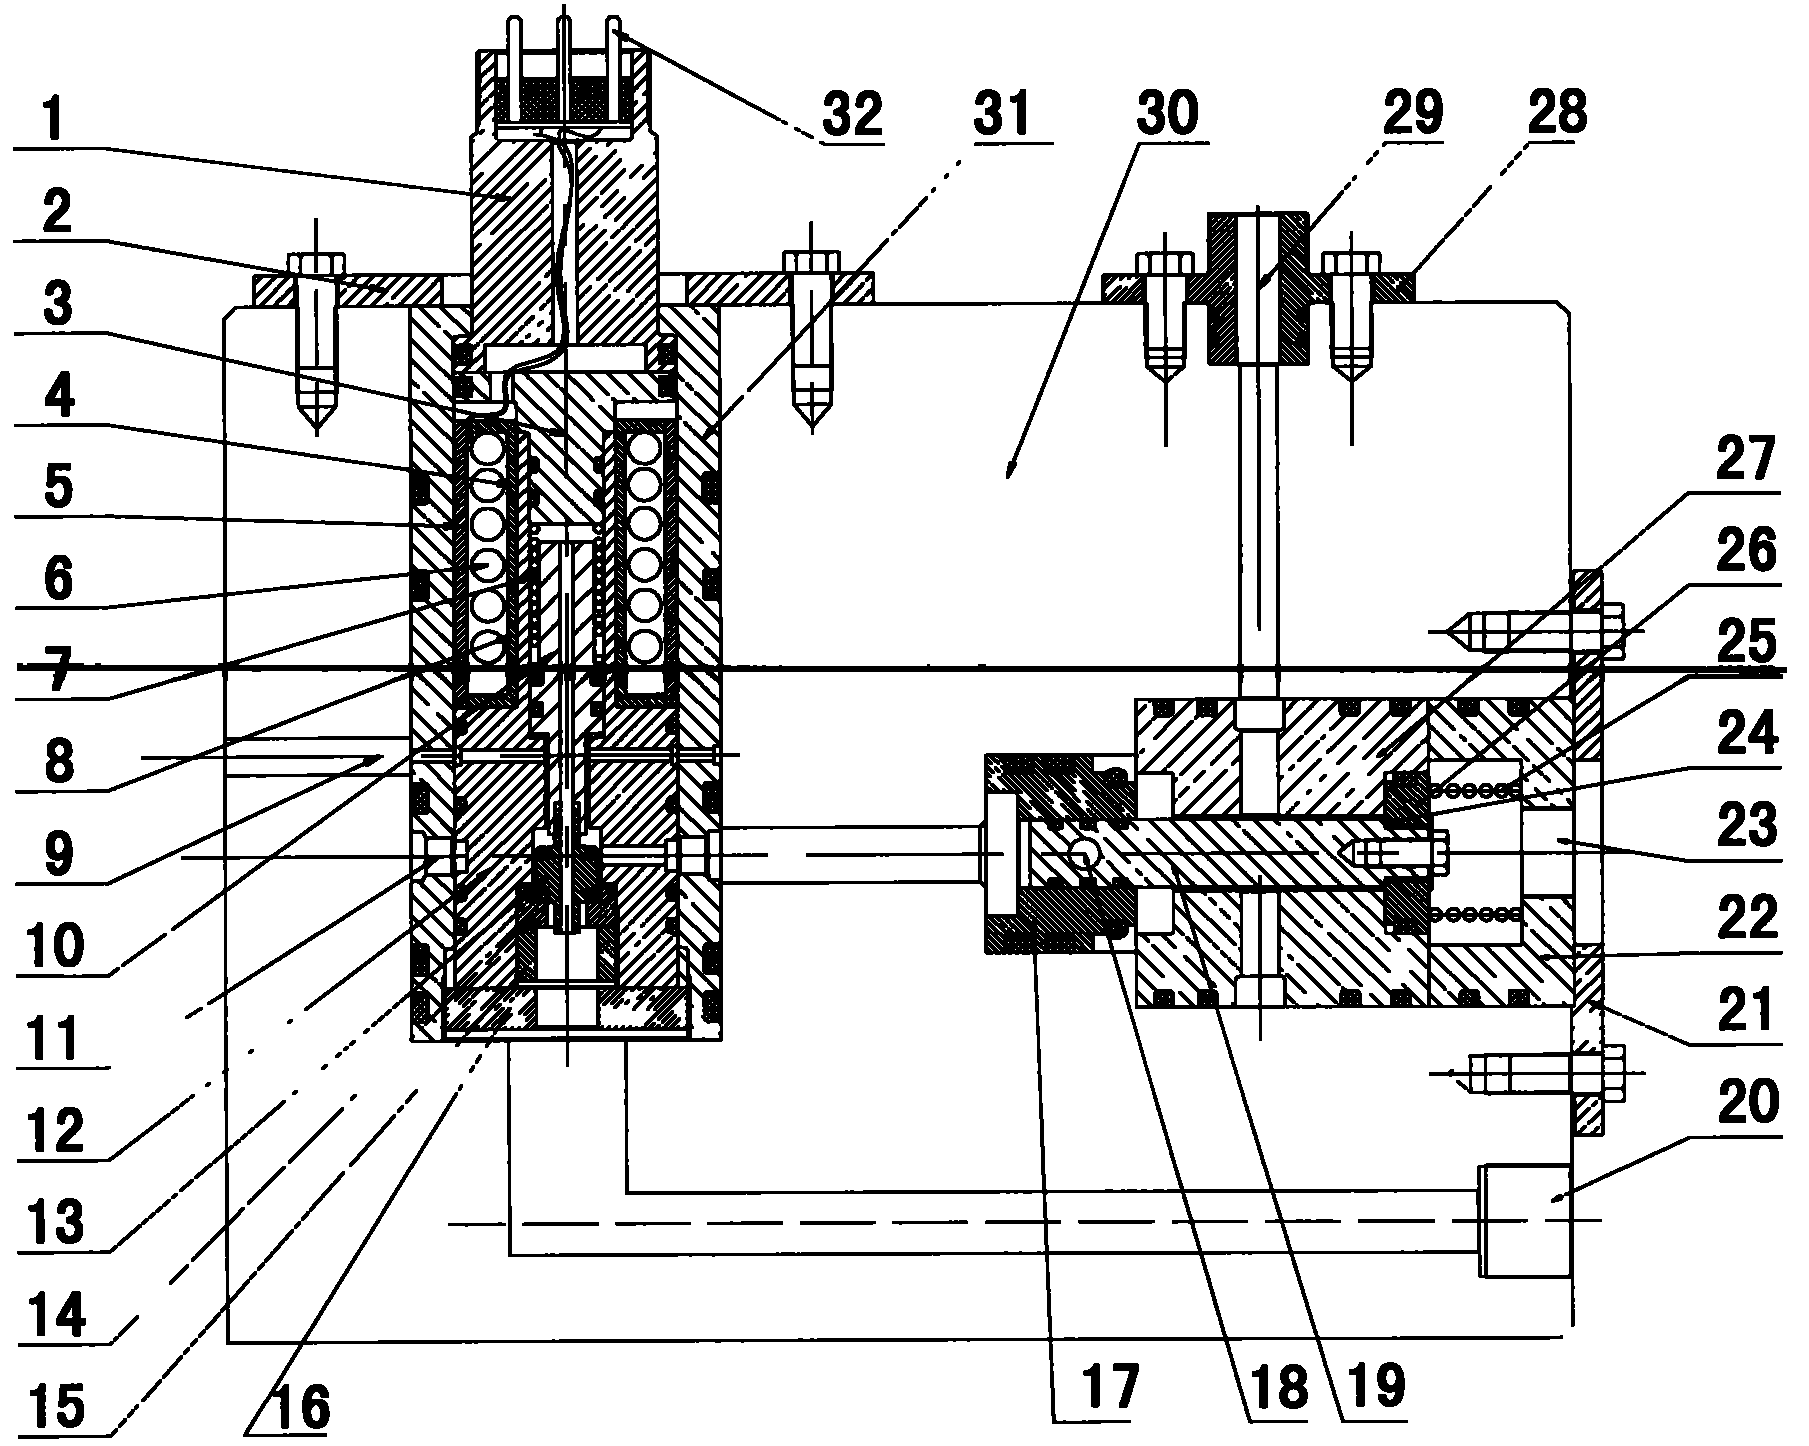 A differential deep water blowout preventer control valve